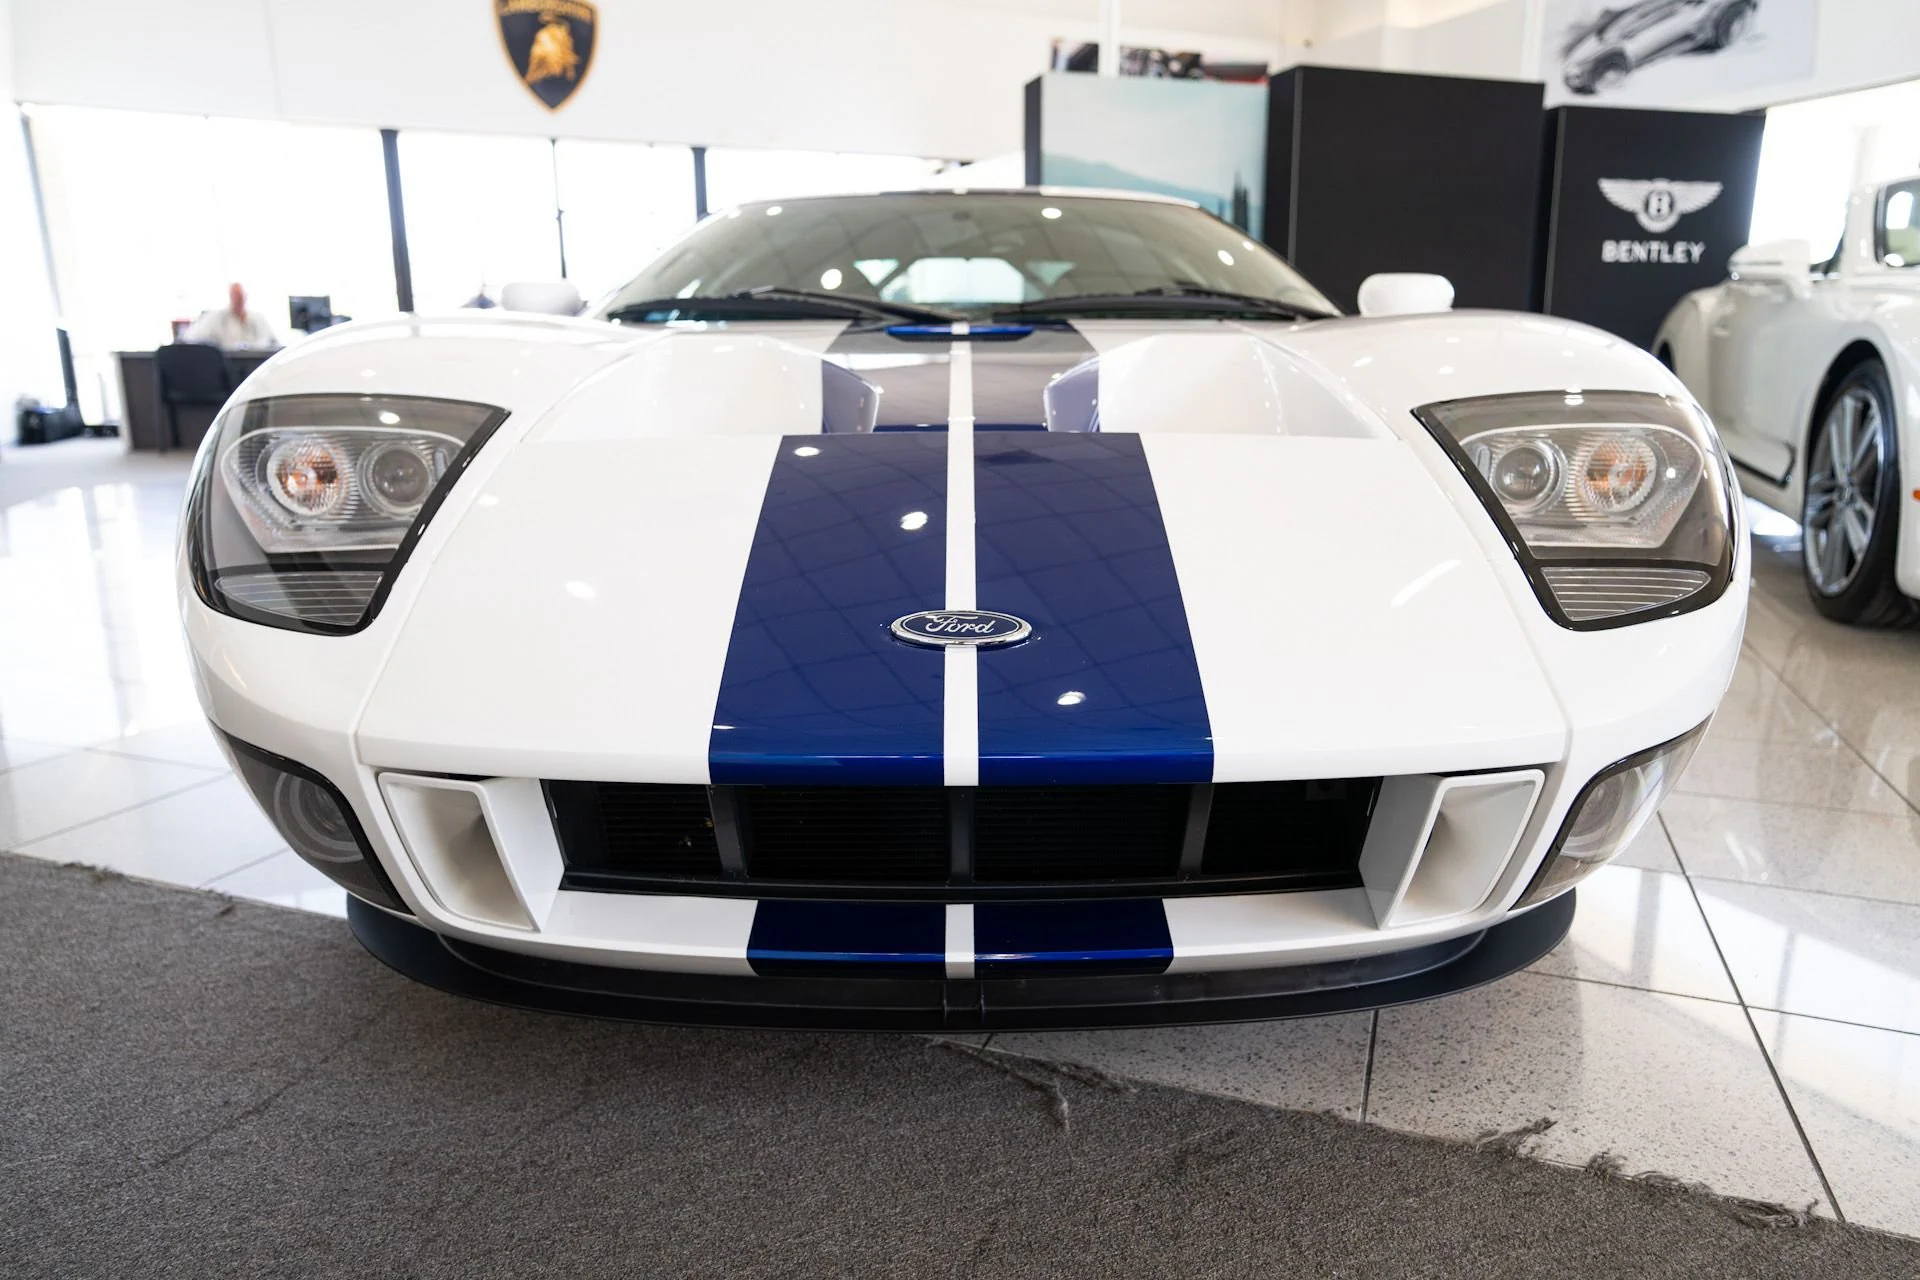 Used 2006 Ford GT coupe (1)